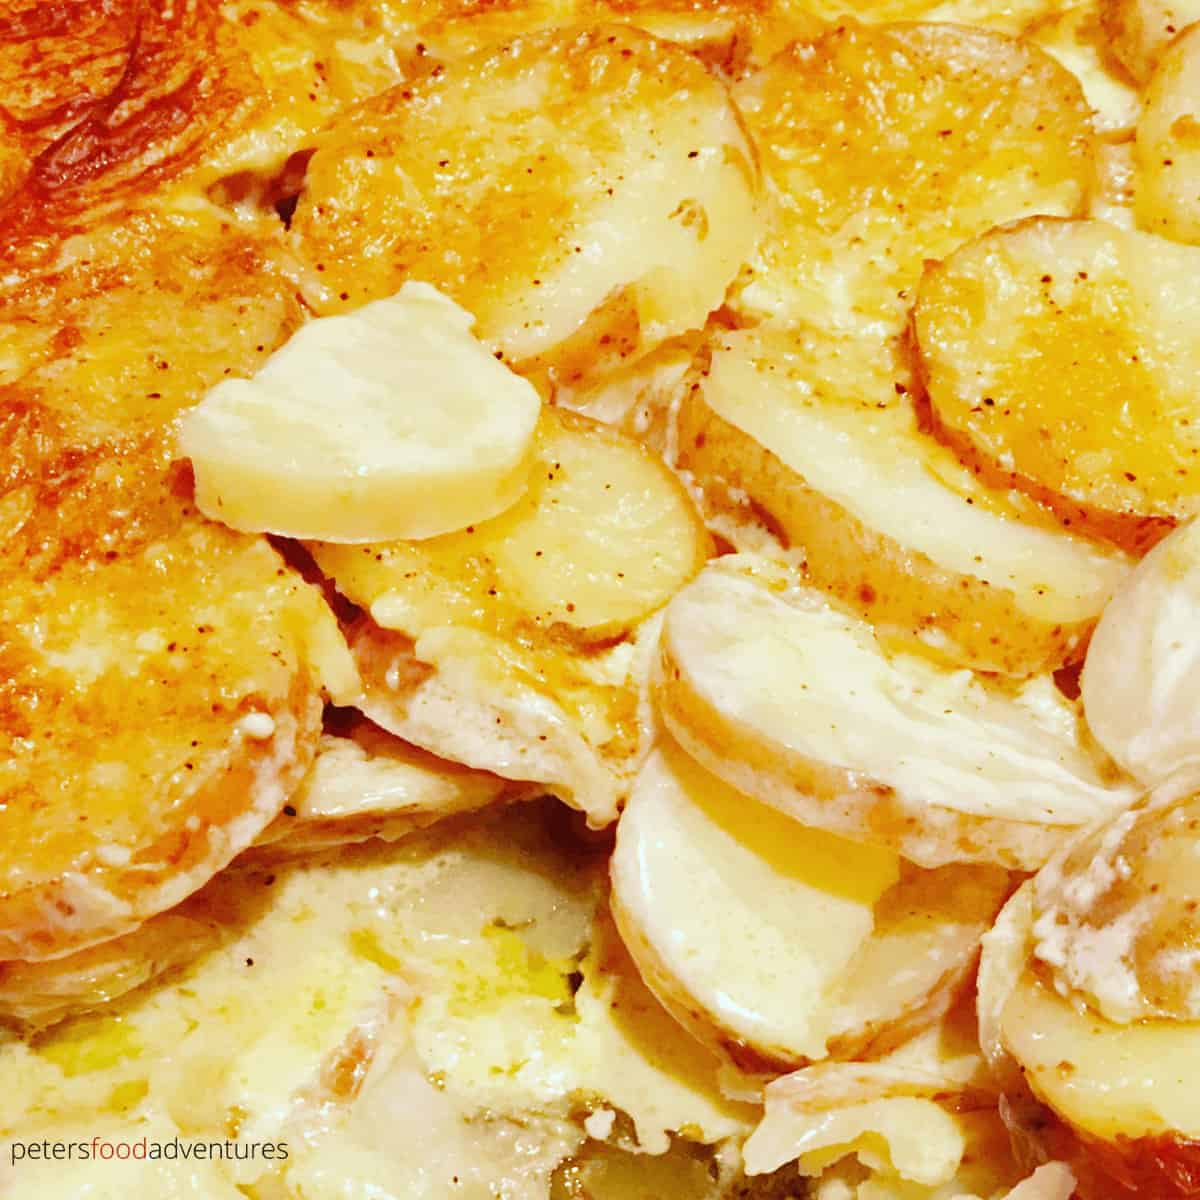 A tasty sidedish that's full of flavor! Creamy Scalloped Potatoes has Parmesan Cheese, whipping cream, garlic, mustard powder, nutmeg and butter. Easy to make, everyone will love this potato bake recipe!